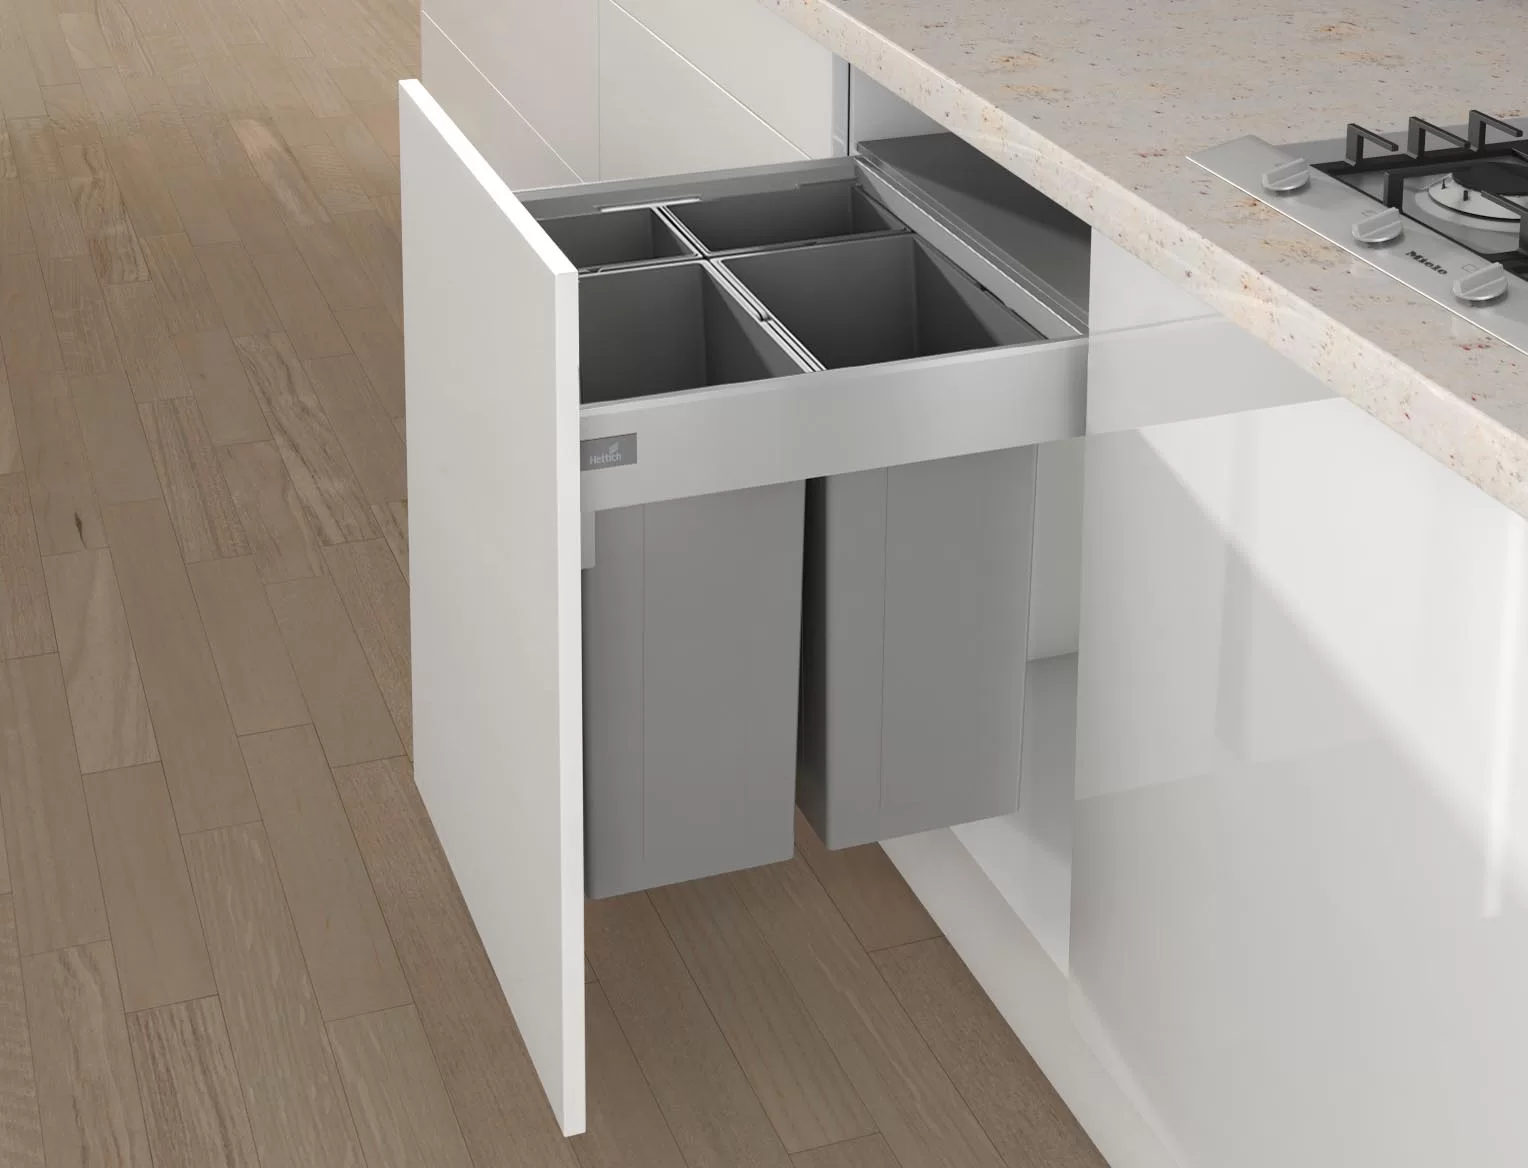 Waste Systems by Hettich